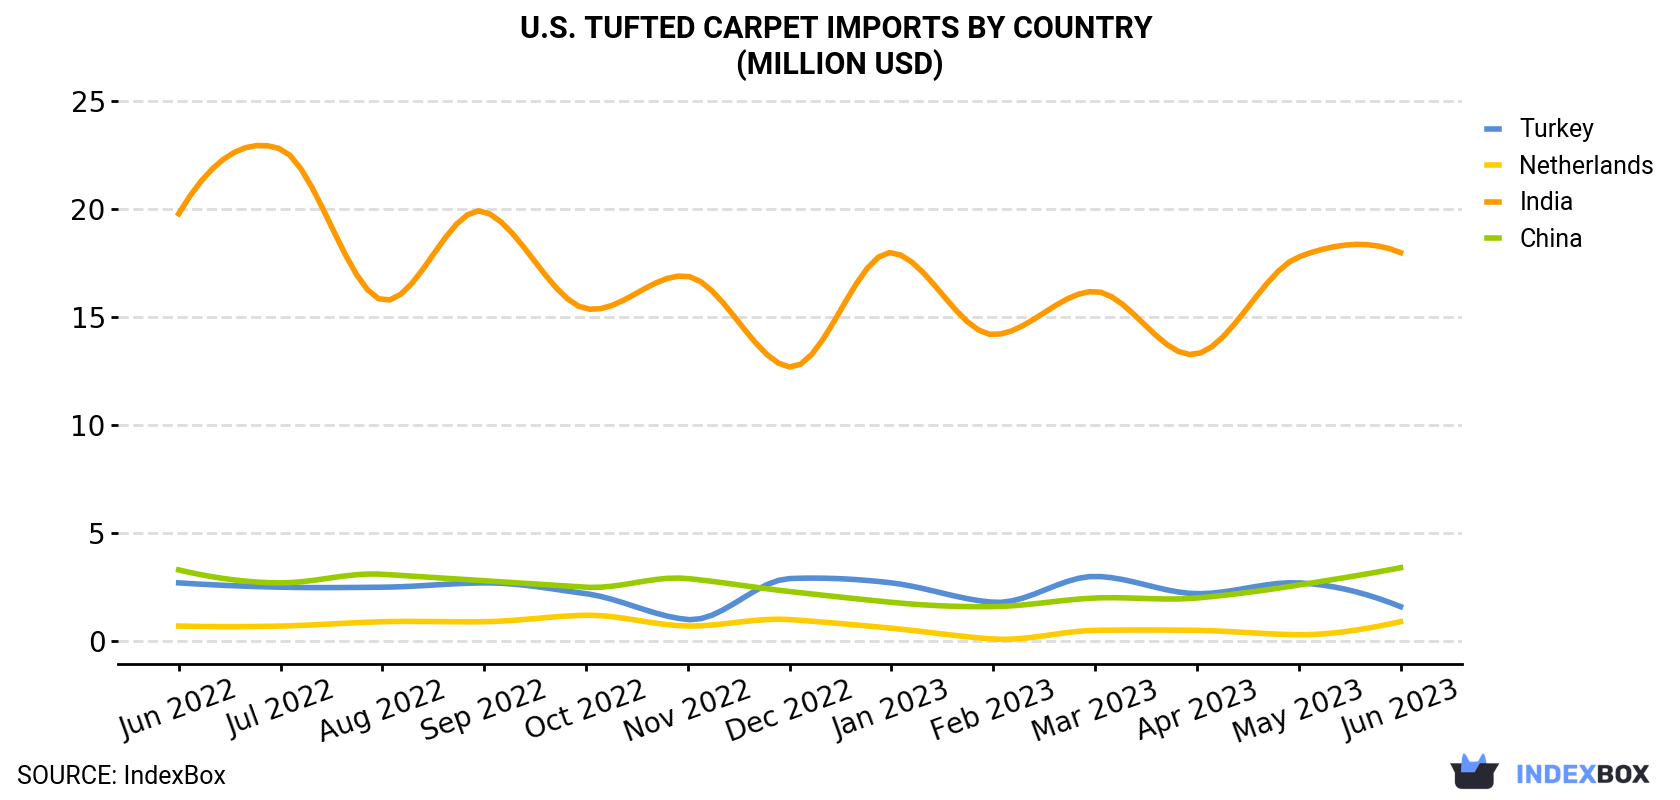 U.S. Tufted Carpet Imports By Country (Million USD)